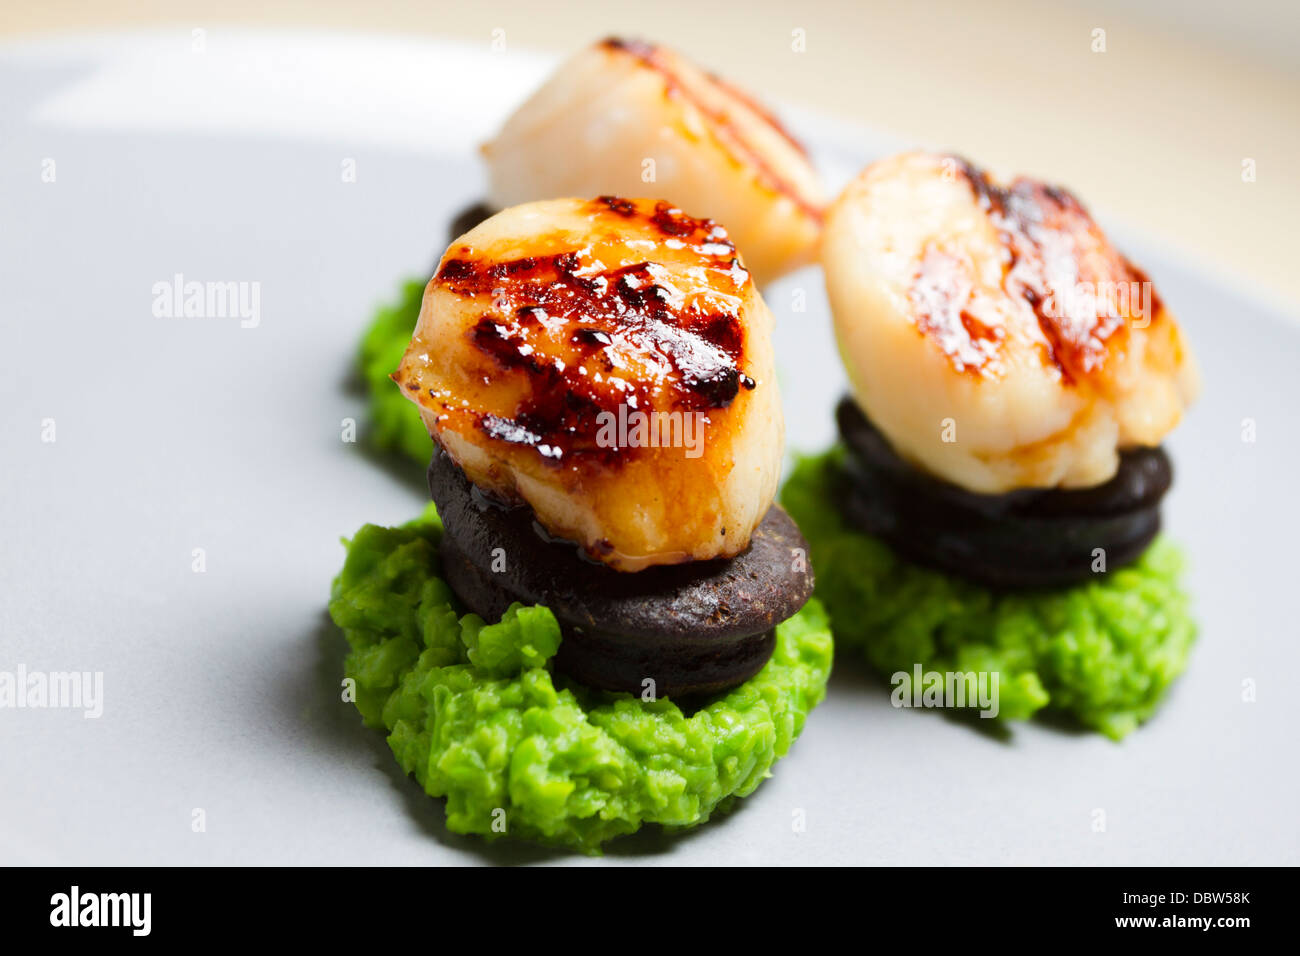 Starter dish of seared scallops/scallop,black pudding and crushed/mushy peas on a plate Stock Photo